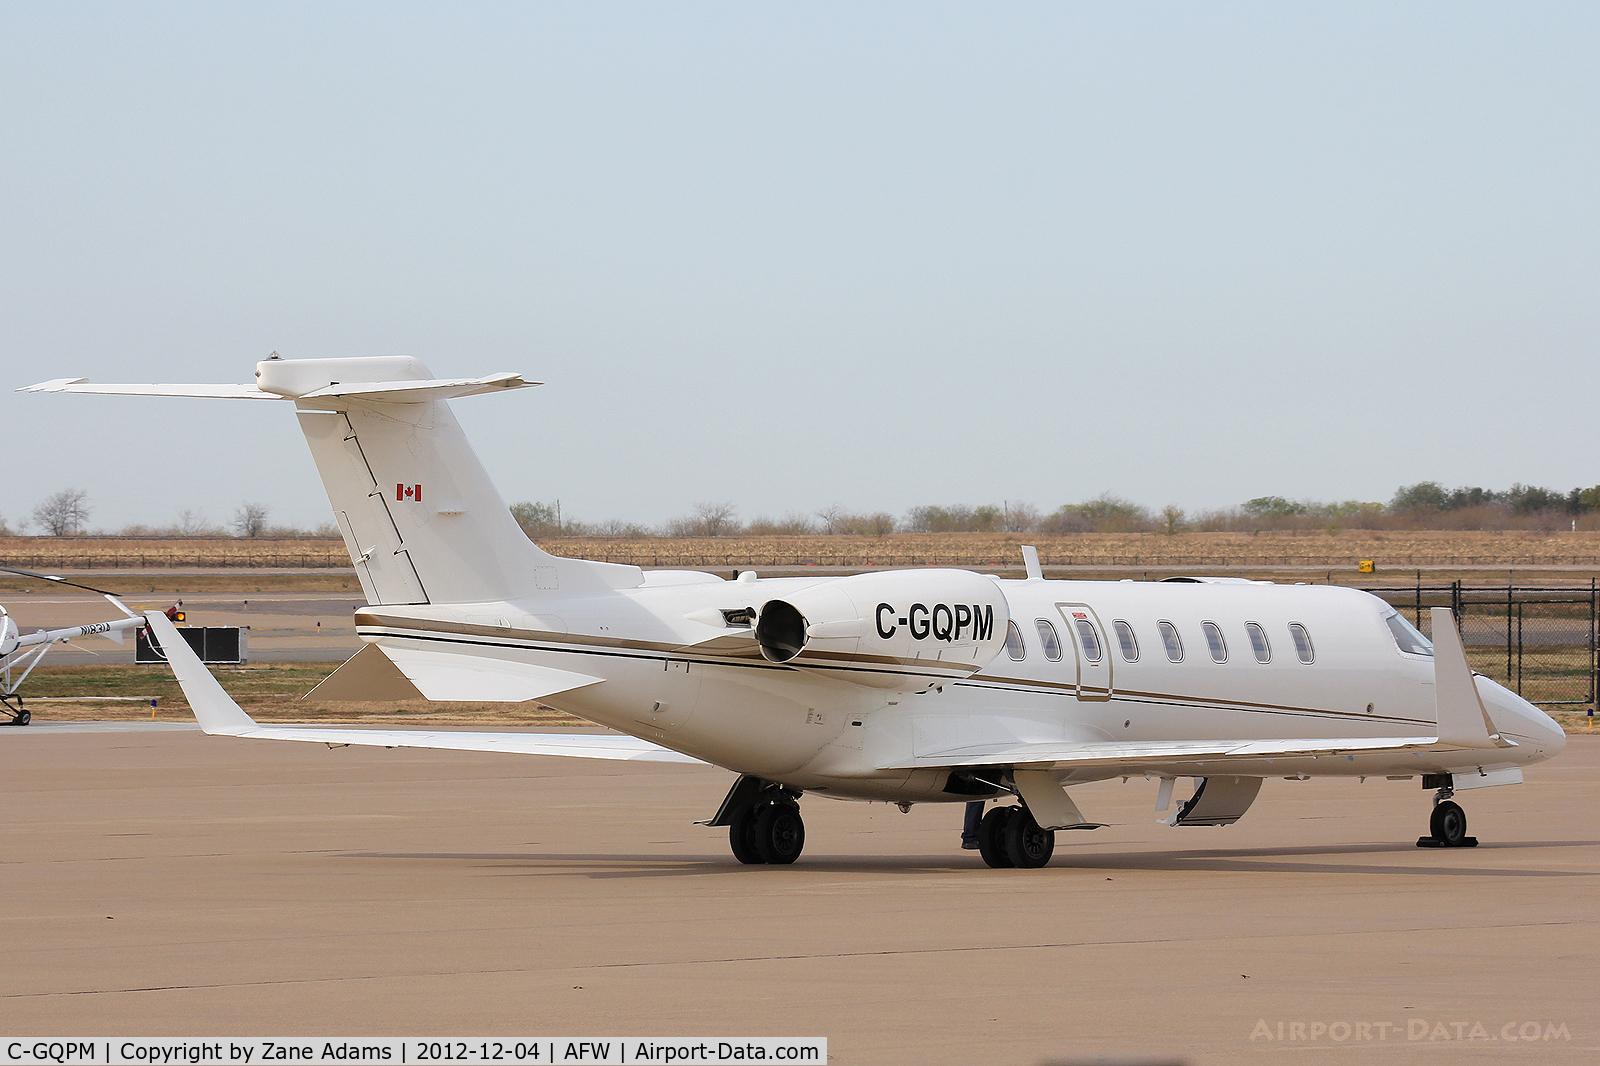 C-GQPM, Learjet Inc 45 C/N 224, At Alliance Airport - Fort Worth, TX